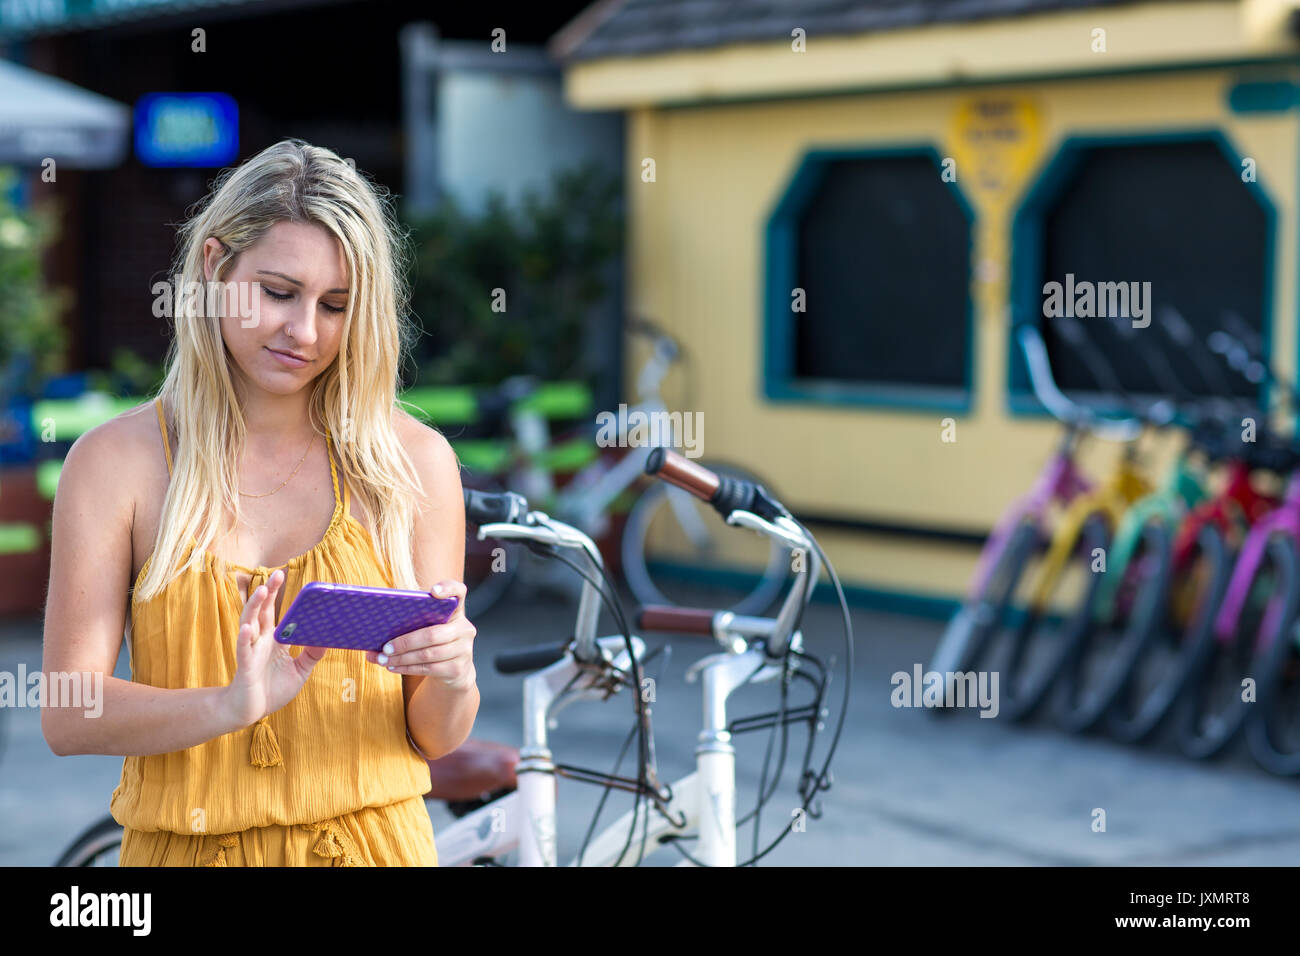 Young woman with long blond hair looking at smartphone by bicycle, Santa Monica, California, USA Stock Photo